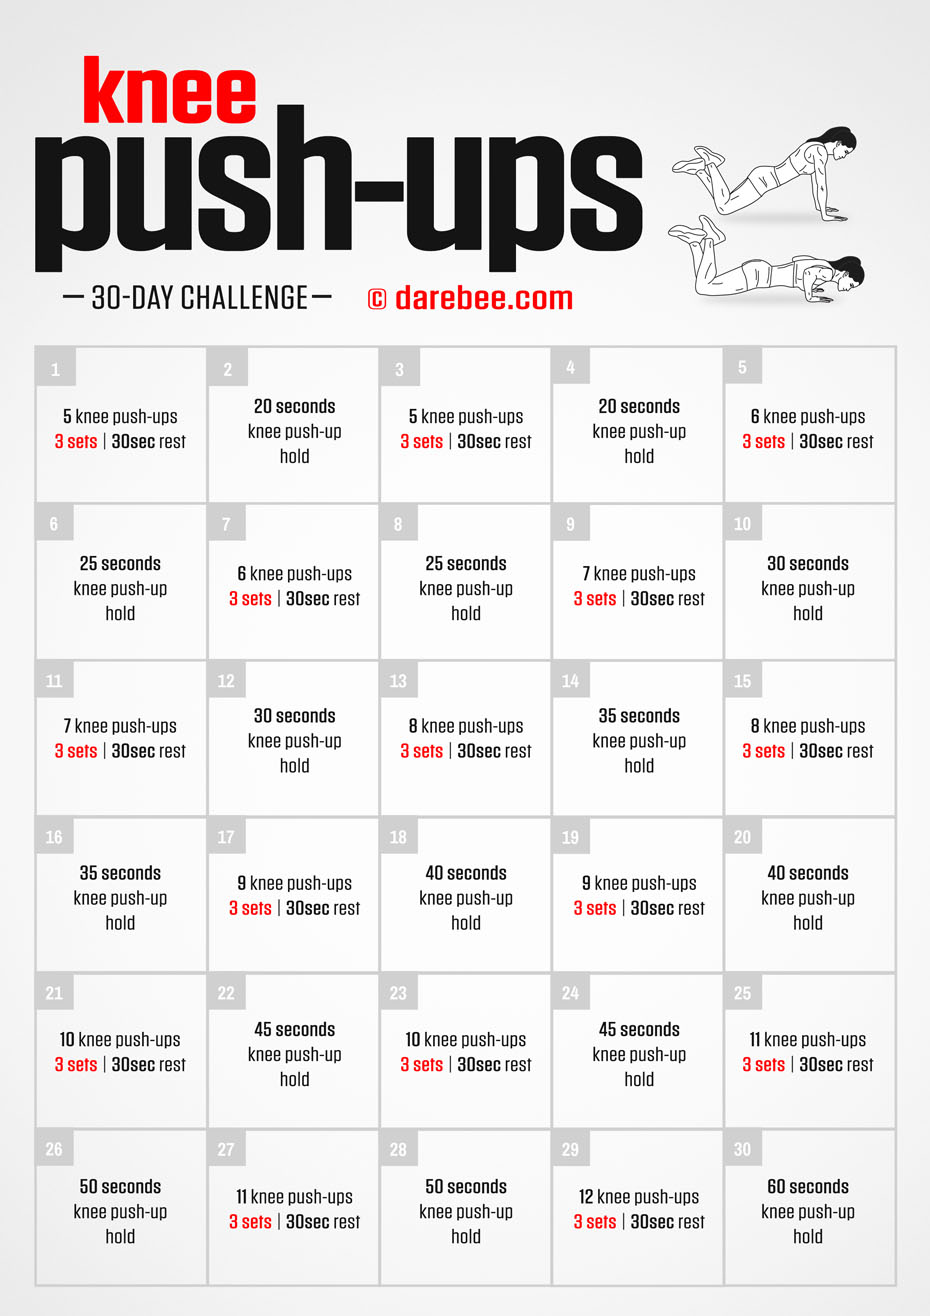 Knee push-up exercise instructions and video